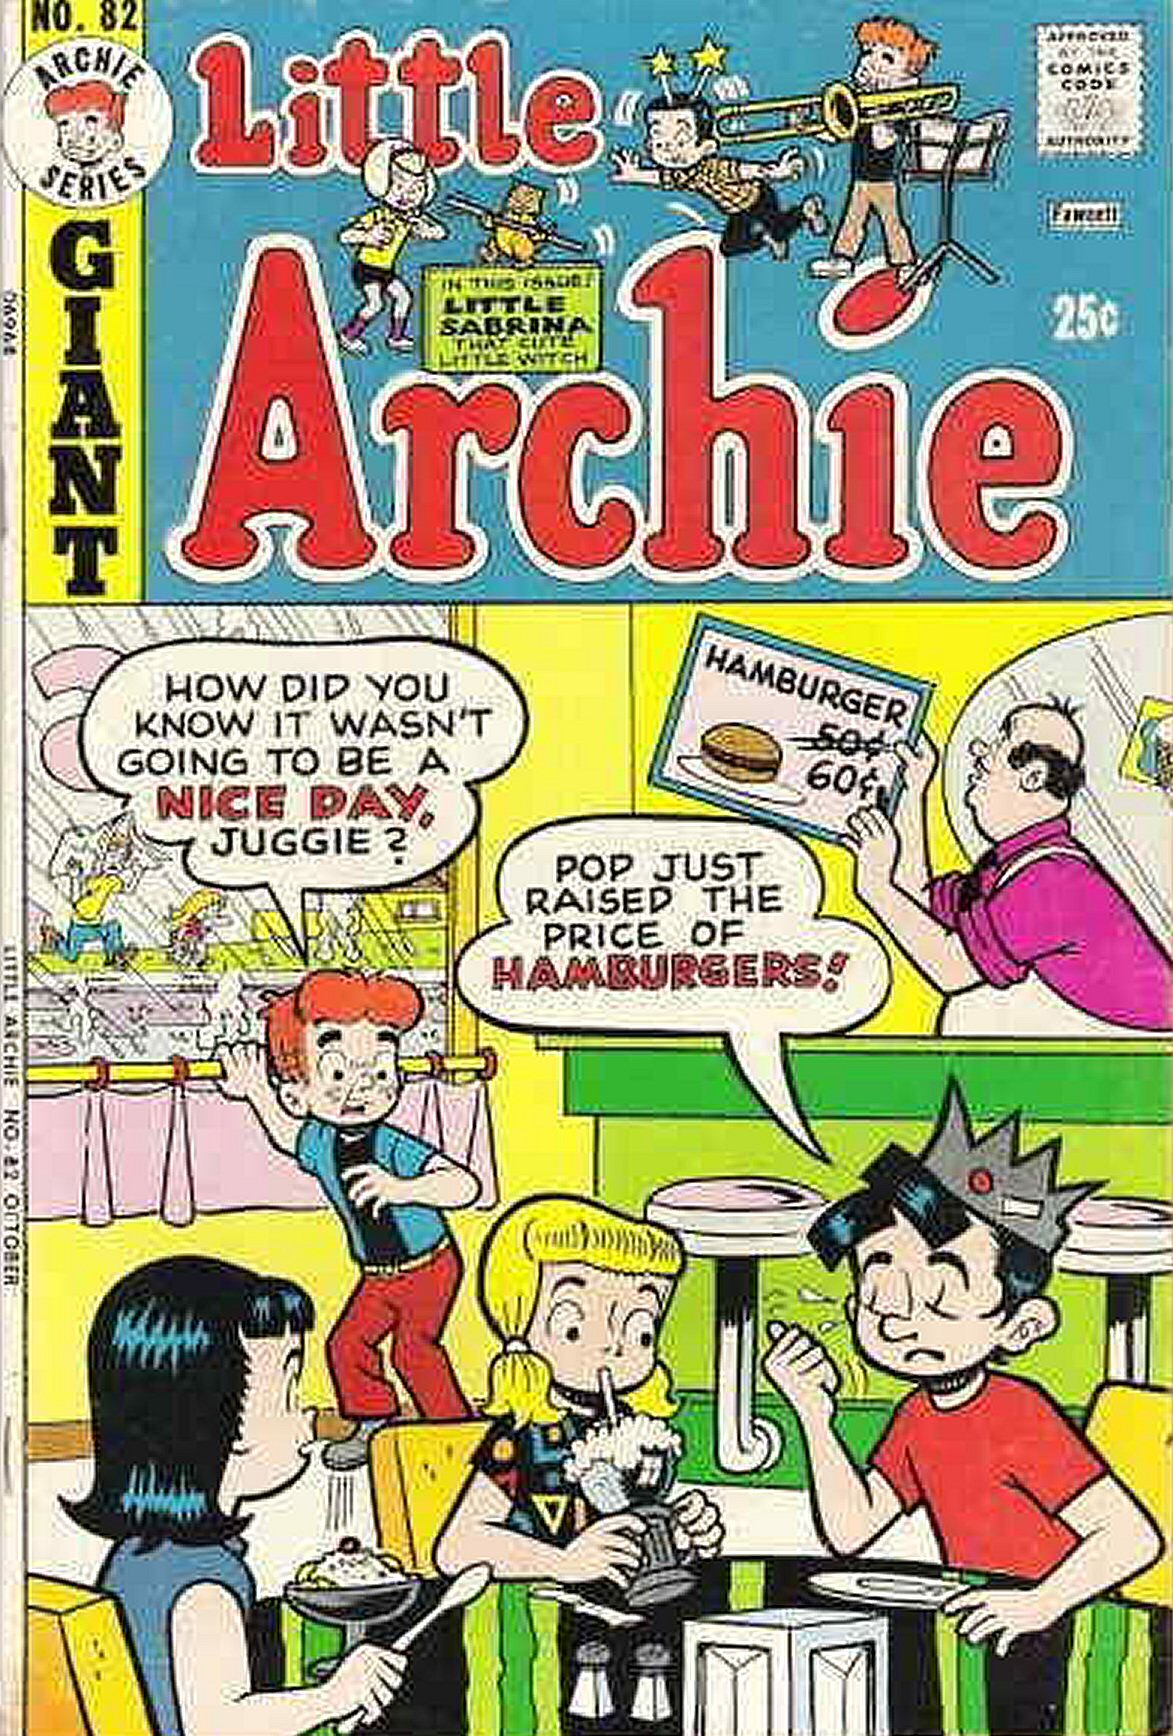 Read online The Adventures of Little Archie comic -  Issue #82 - 1